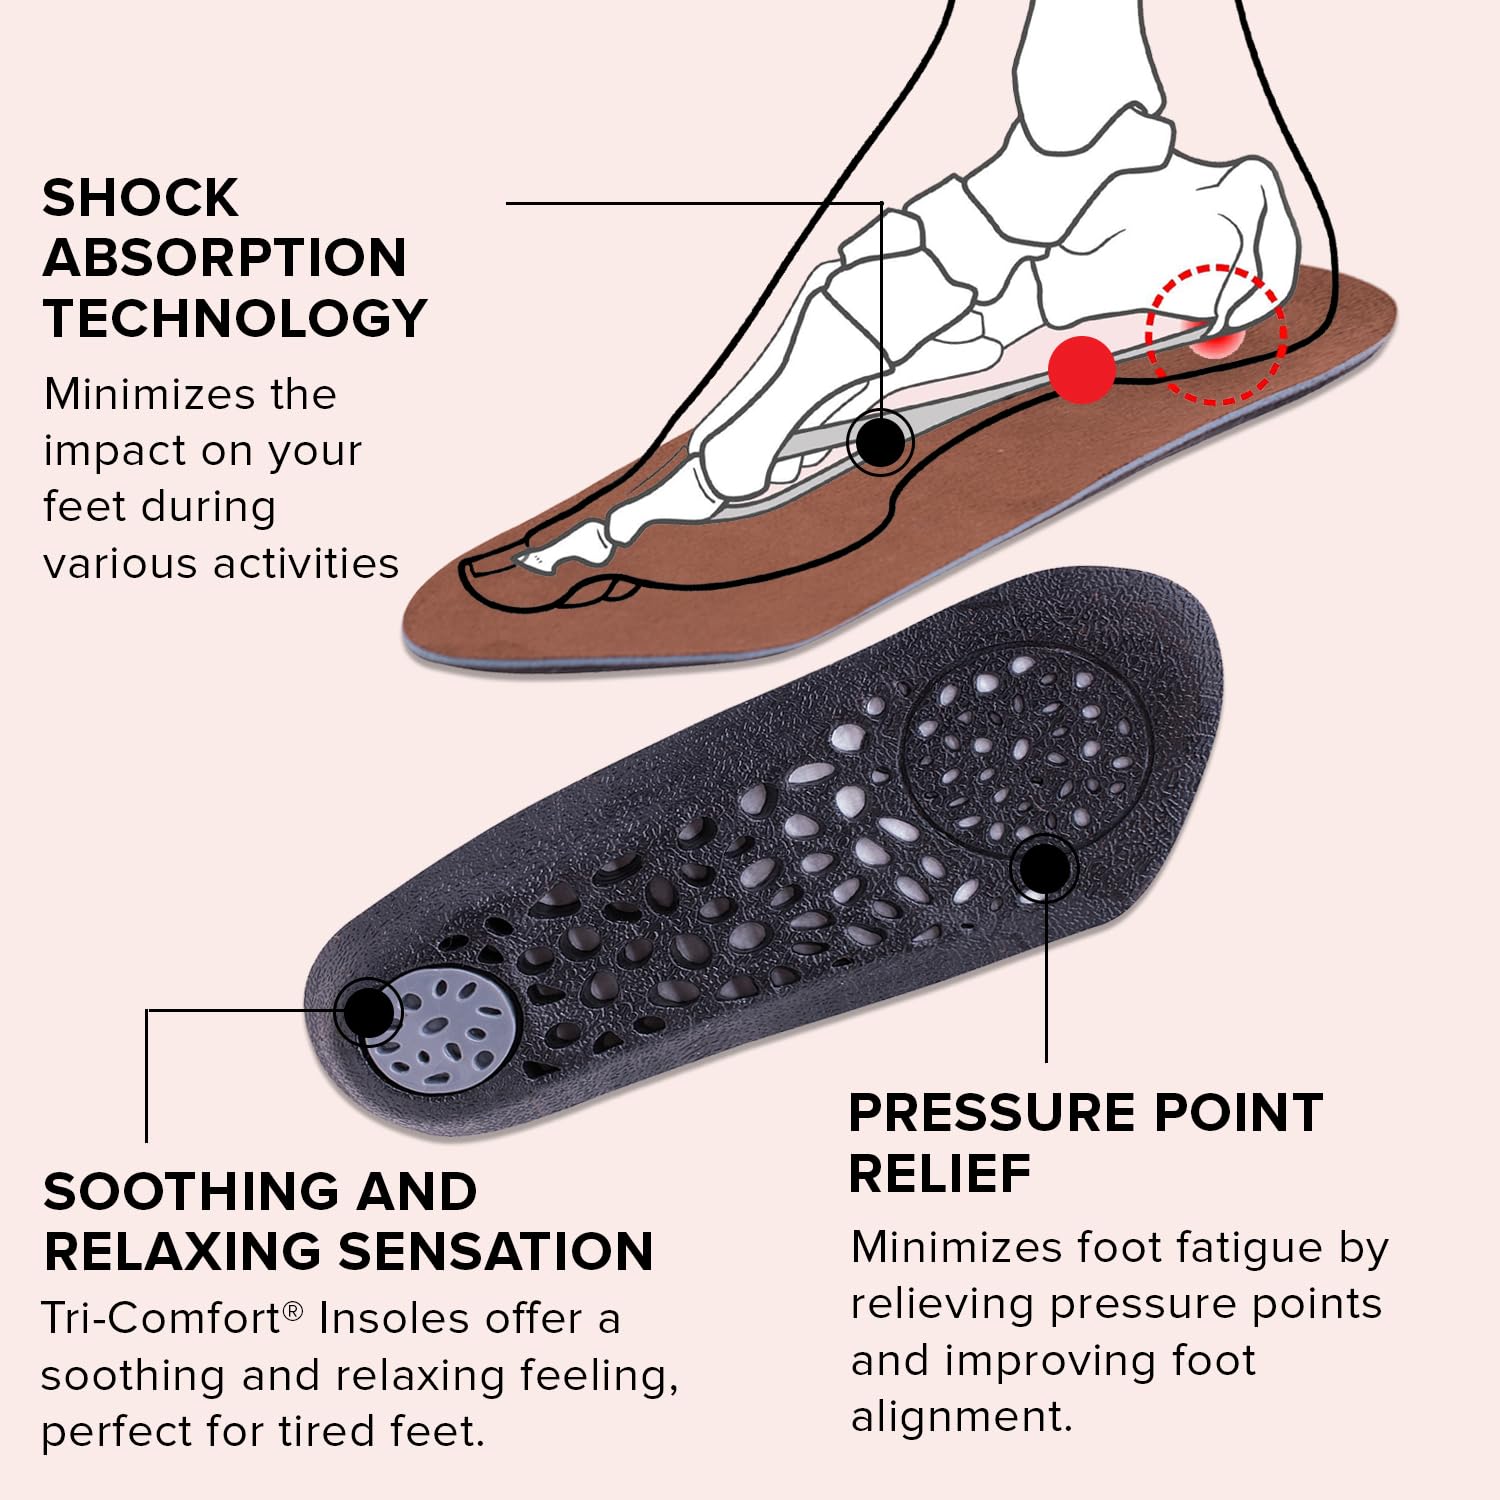 Dr Foot TRI Comfort Insoles | For Heel, Arch Support & Ball Of Foot With Targeted Cushioning | Shock Absorption, Comfort, Breathability| For Men & Women - 1 Pair